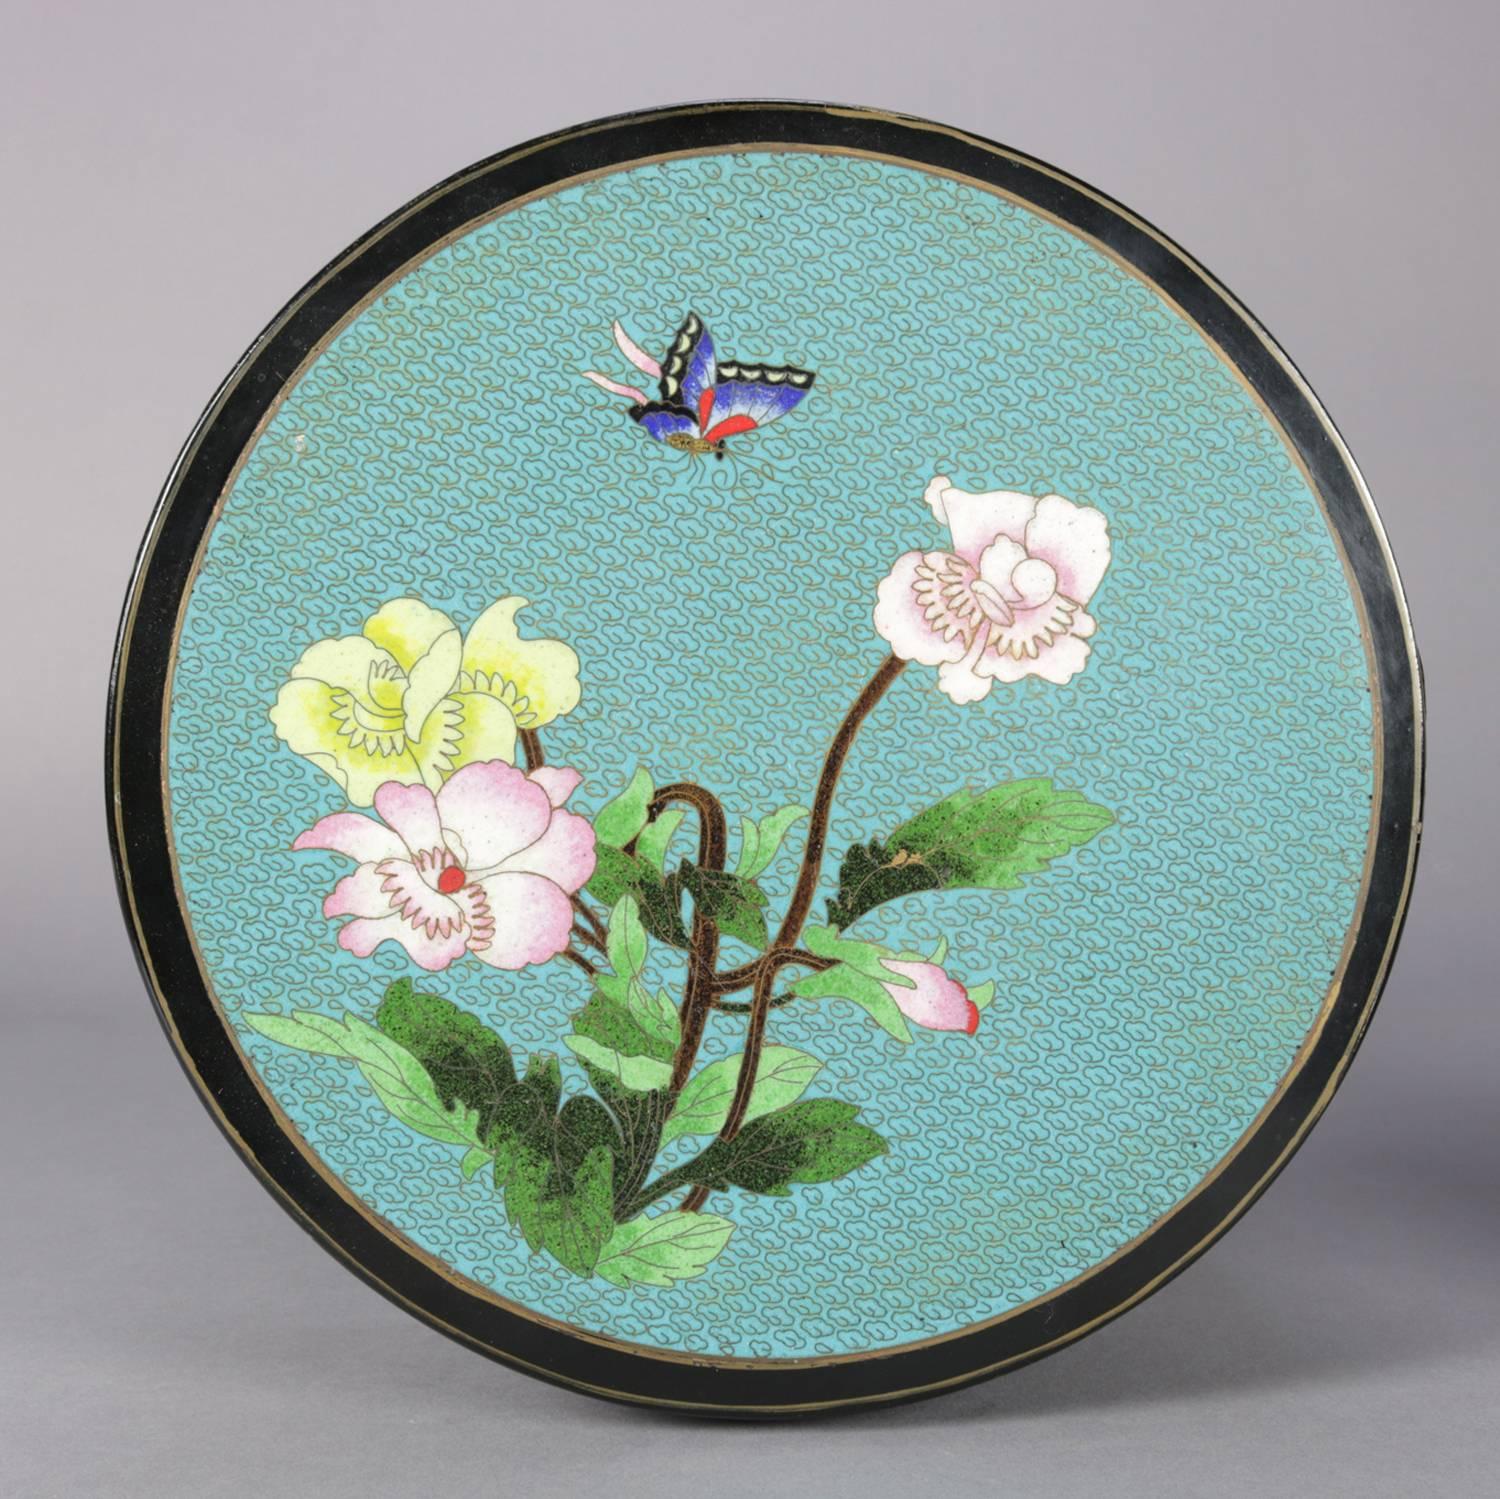 Vintage round Chinese plant stand features Cloisonne enameled top with garden flower and butterfly decoration, seated in floral and Greek Key decorated black lacquer frame, 20th century

Measures - 32